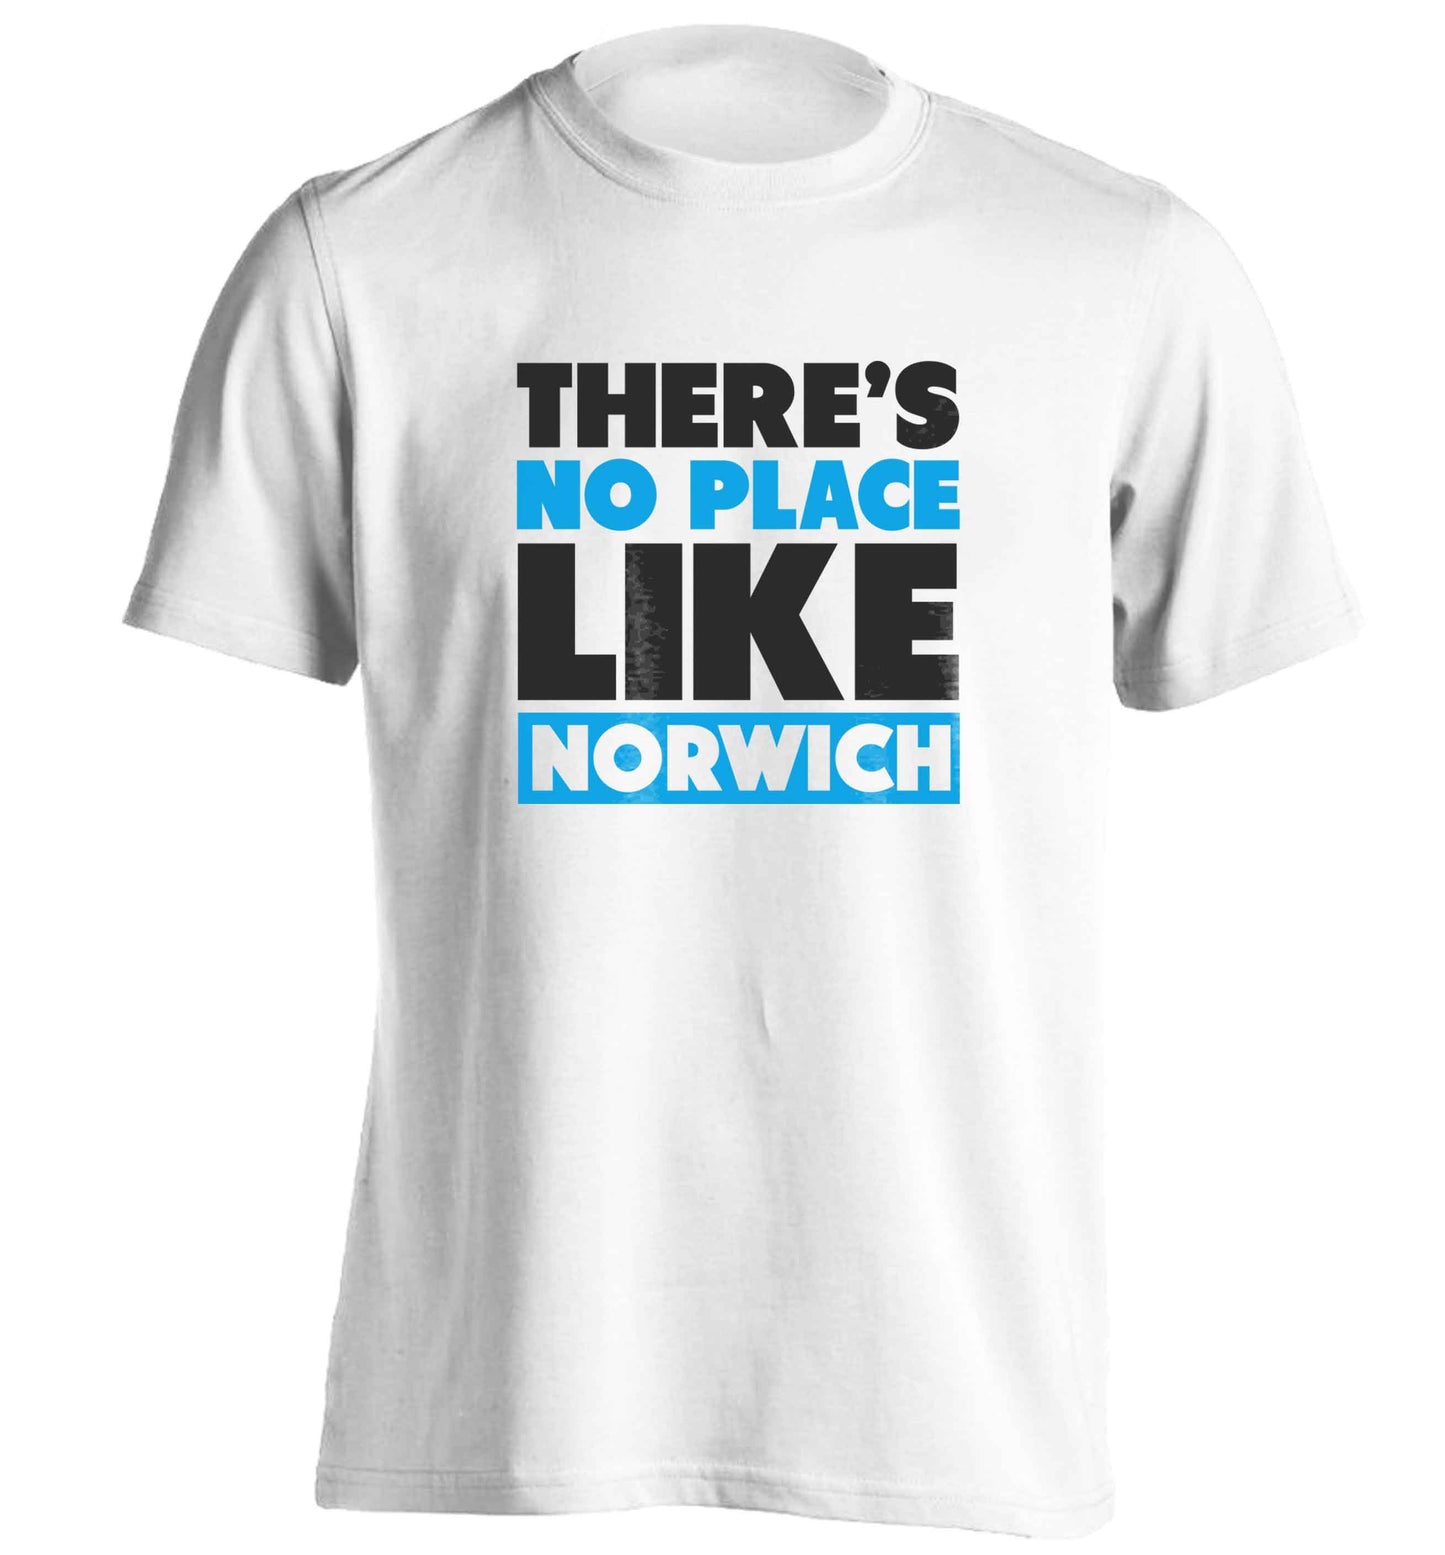 There's no place like Norwich adults unisex white Tshirt 2XL